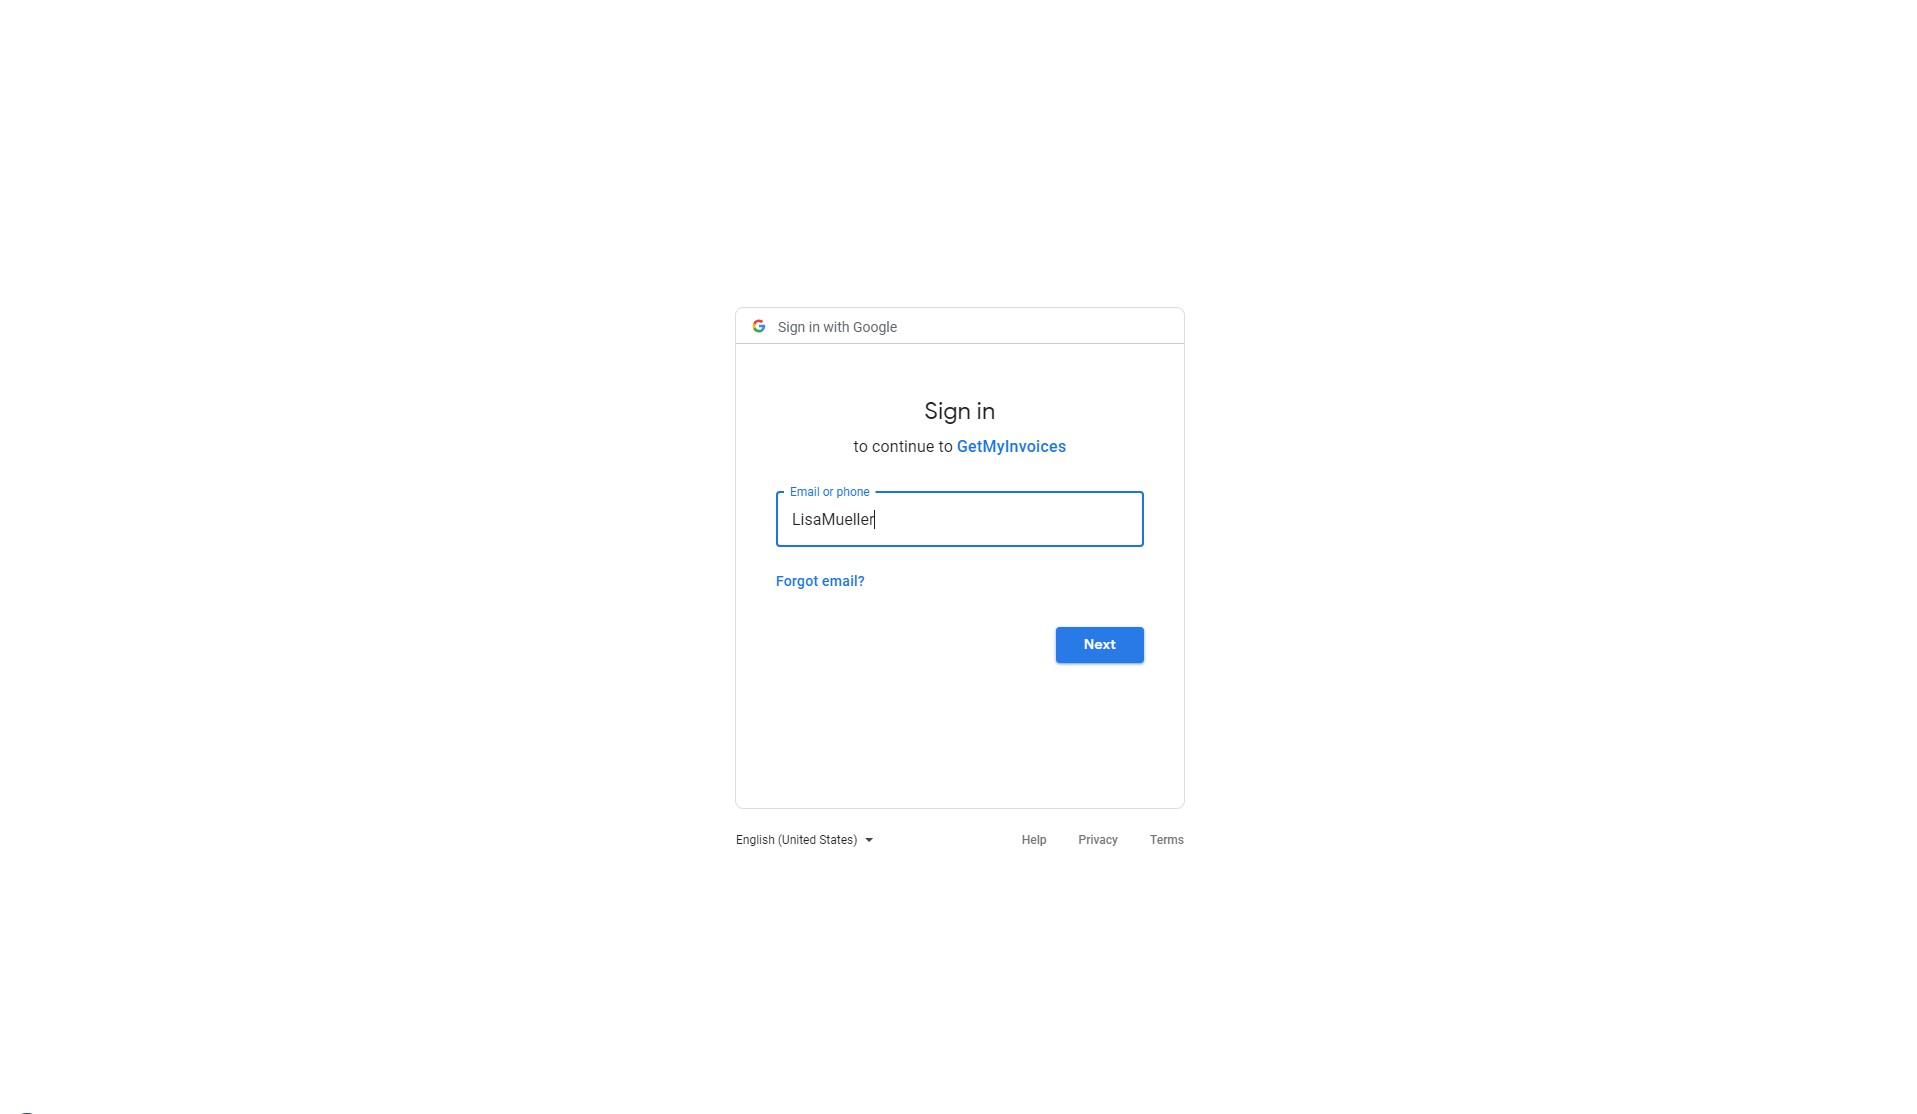 3. Document Export: Connect to Google Drive